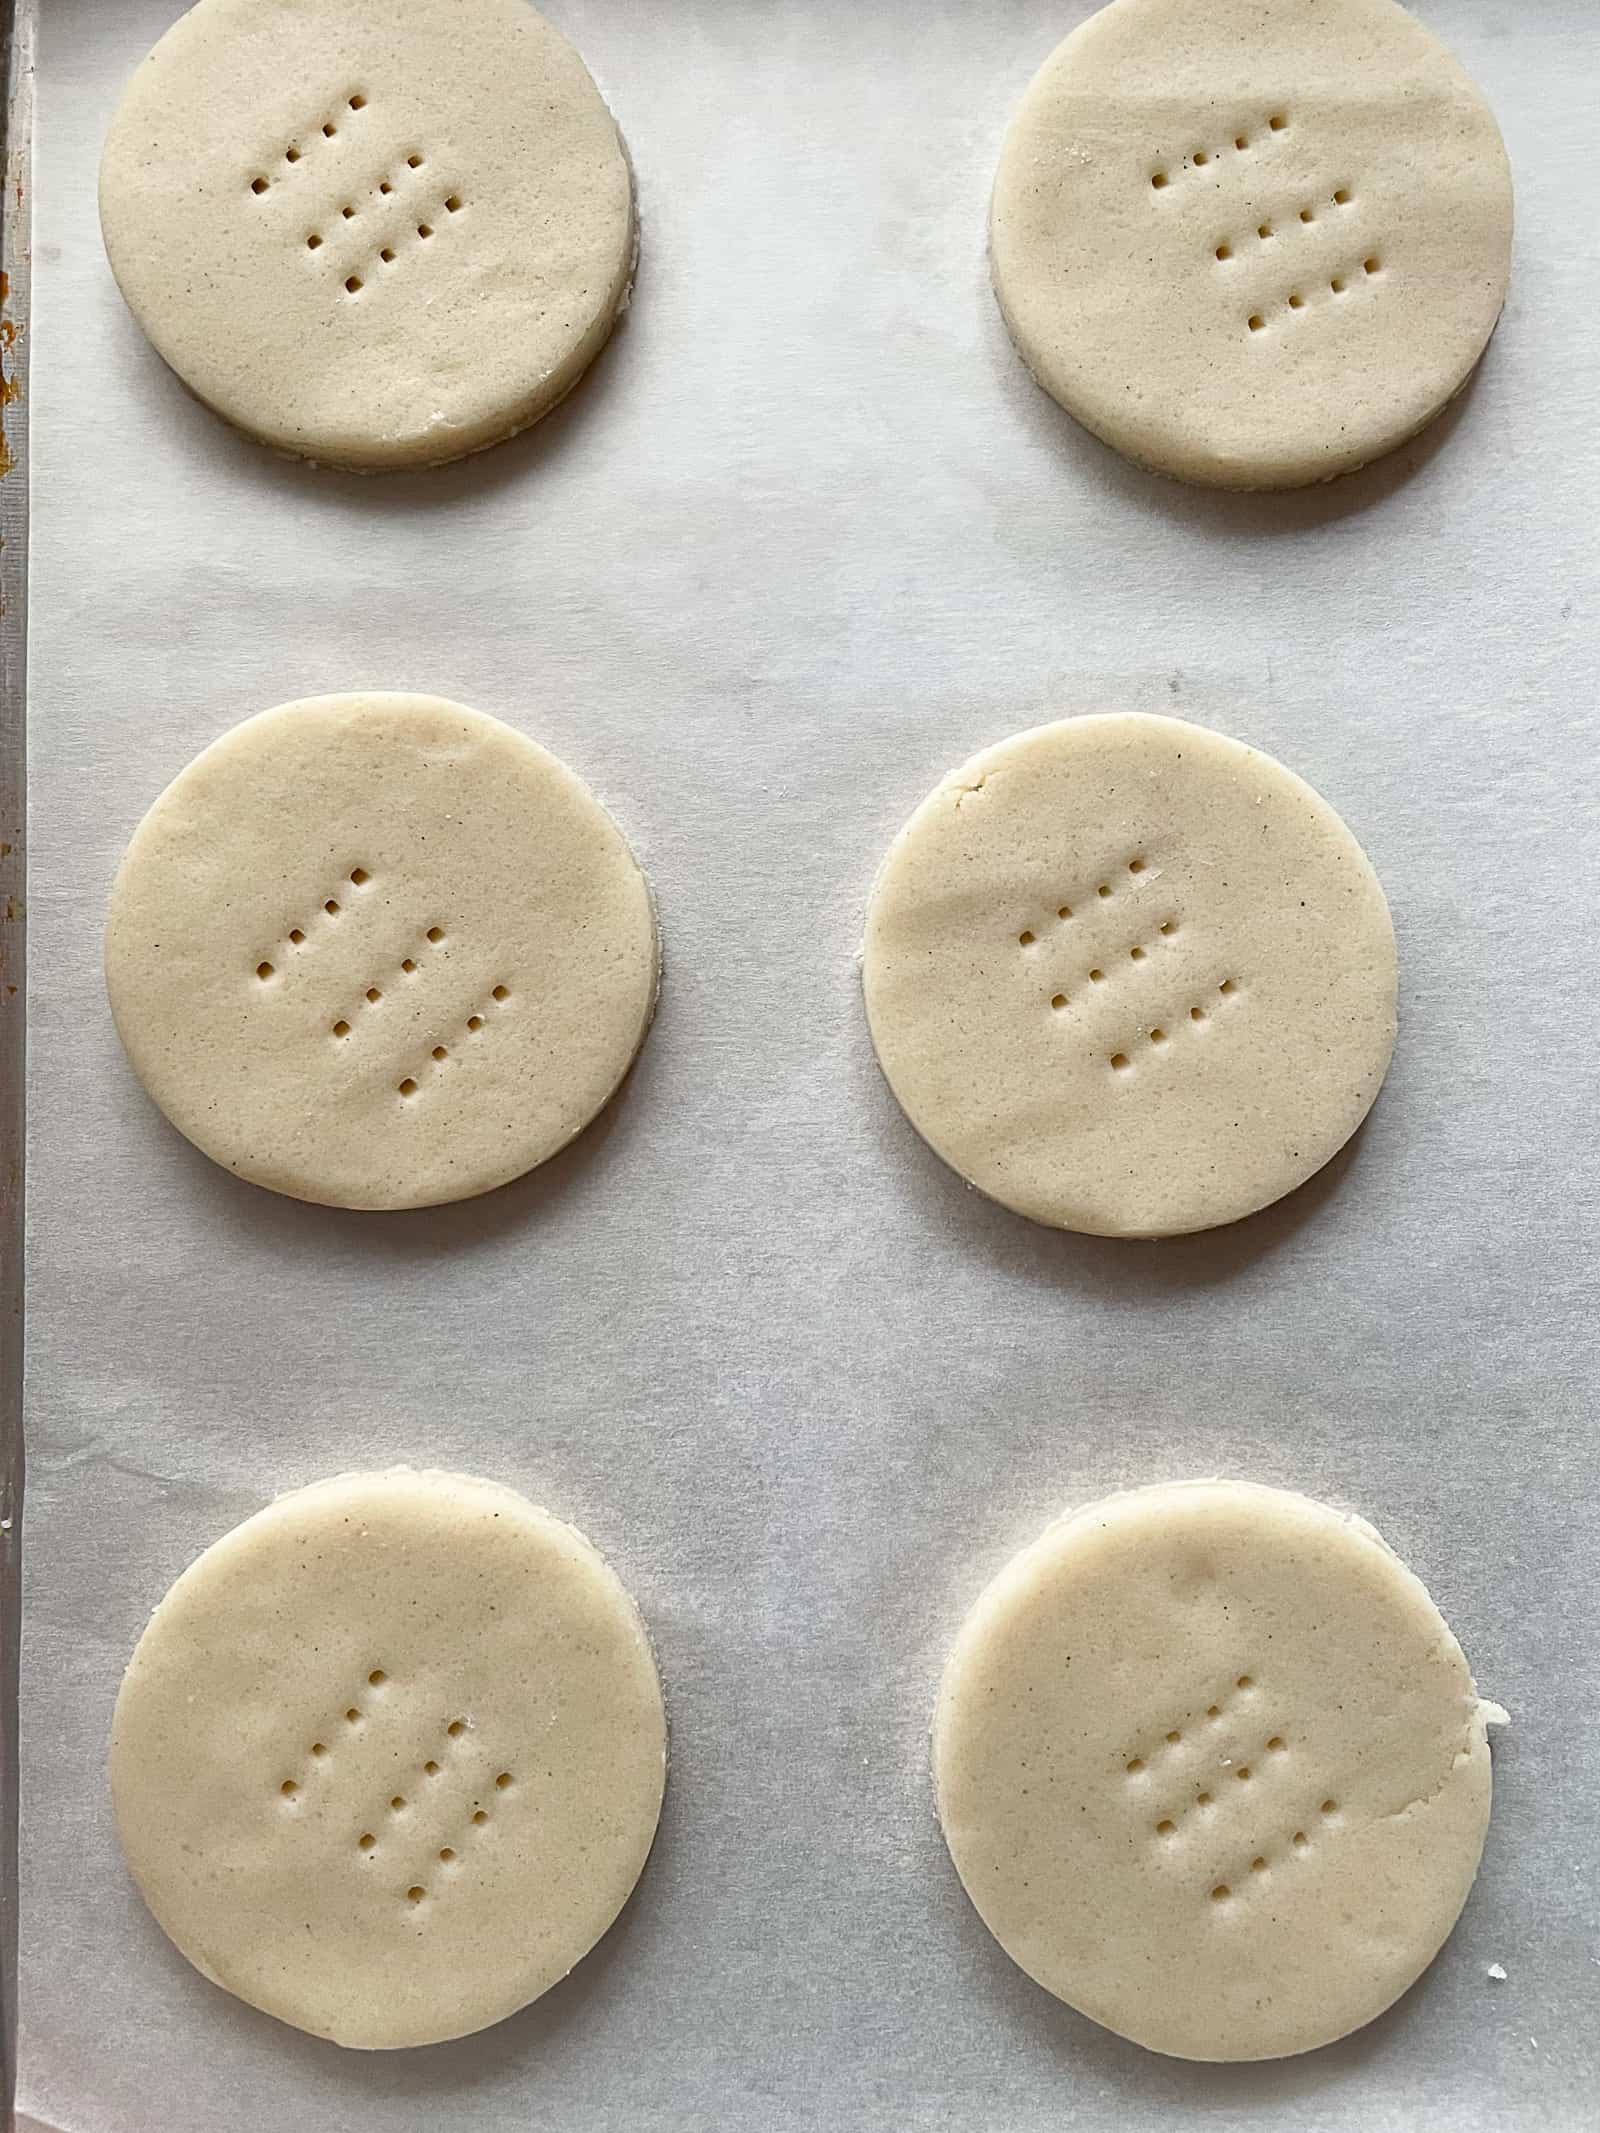 Gluten-free shortbread cookies cut into rounds.